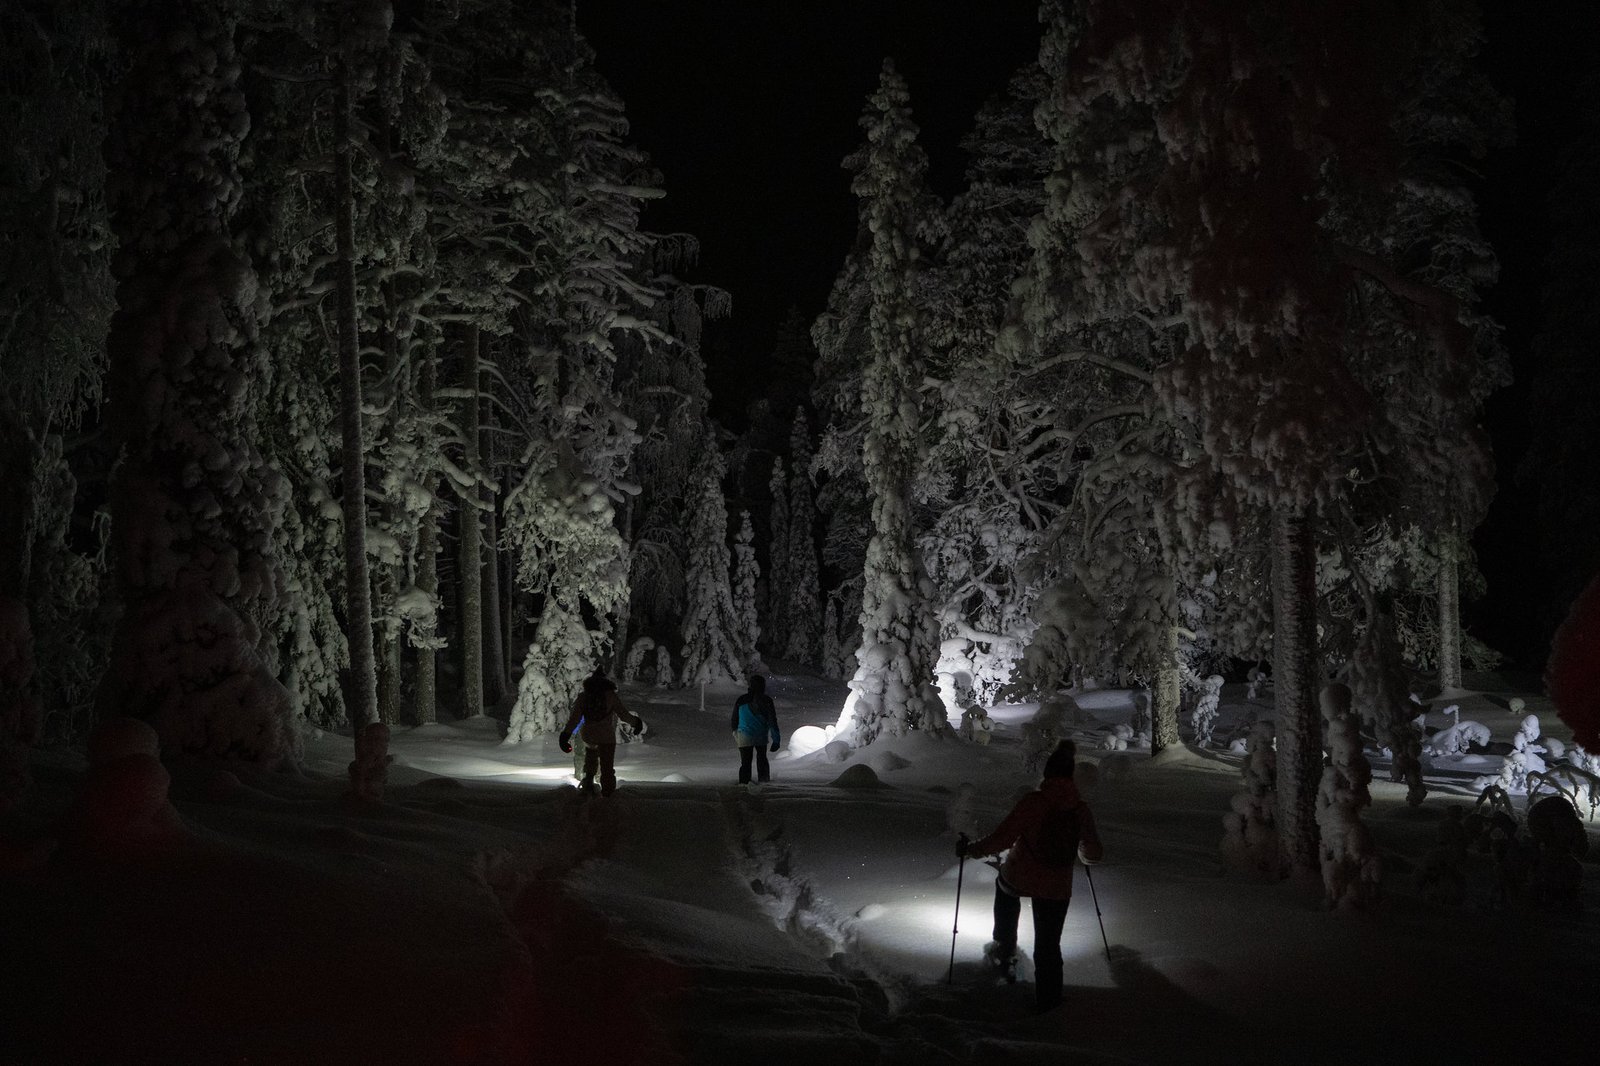 Snowshoes by night